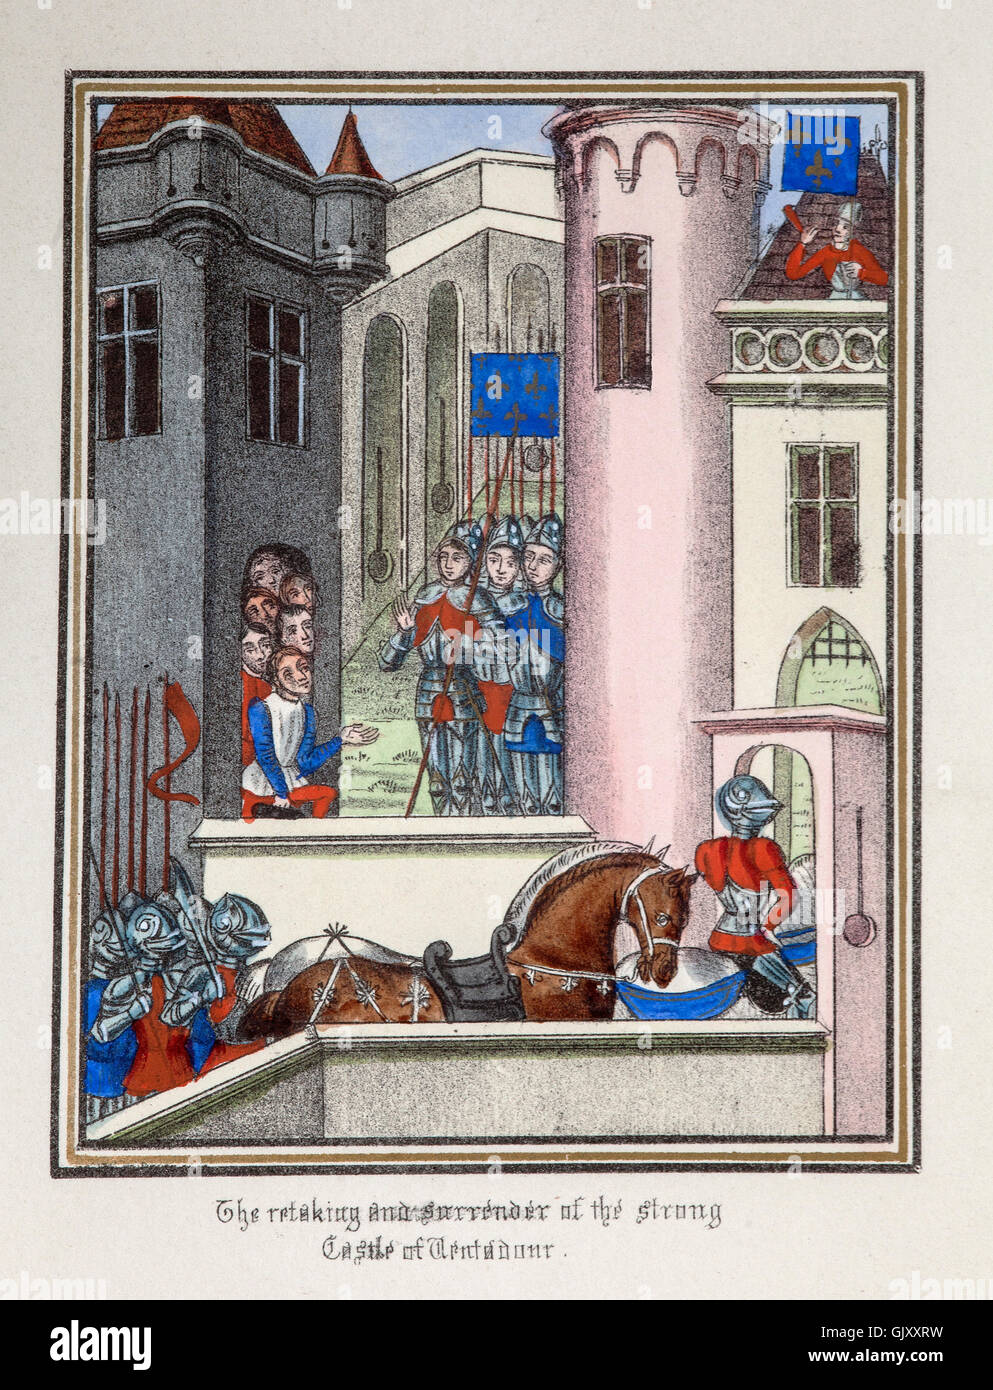 The surrender and retaking of the Castle at Ventadour by the Duke de Berri following the castle's occupation by by people of the Free Companies, who were little more than robbers. Stock Photo